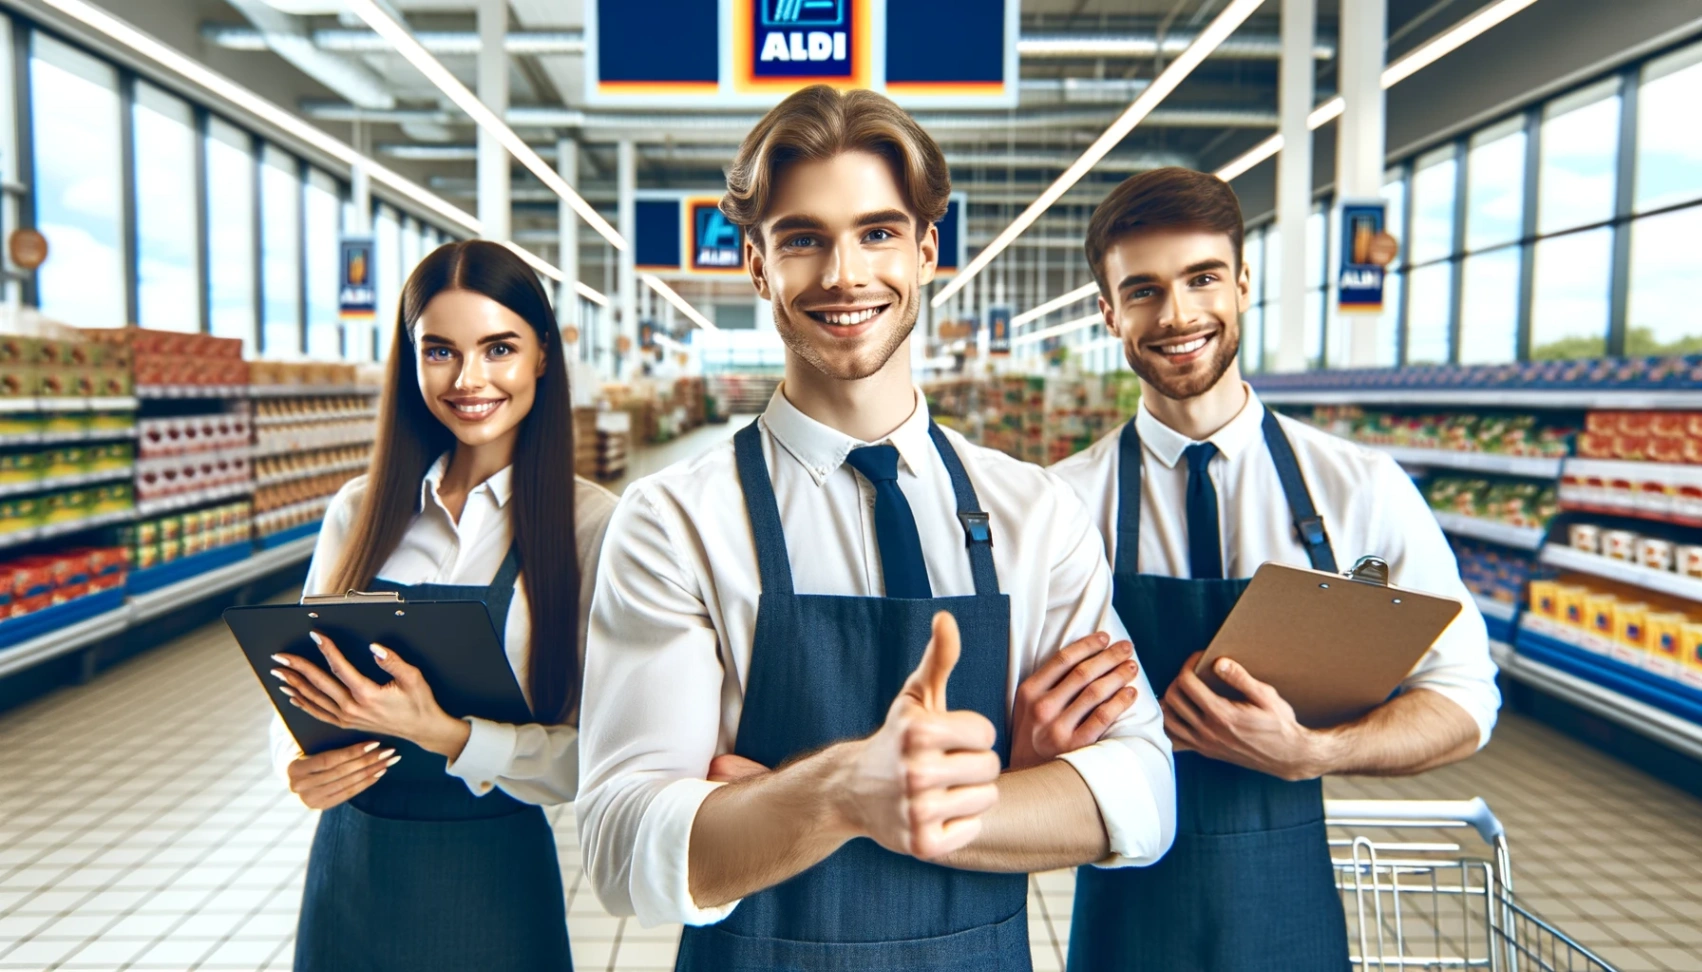 Aldi Job Opportunities and Hiring Process: Learn How to Apply